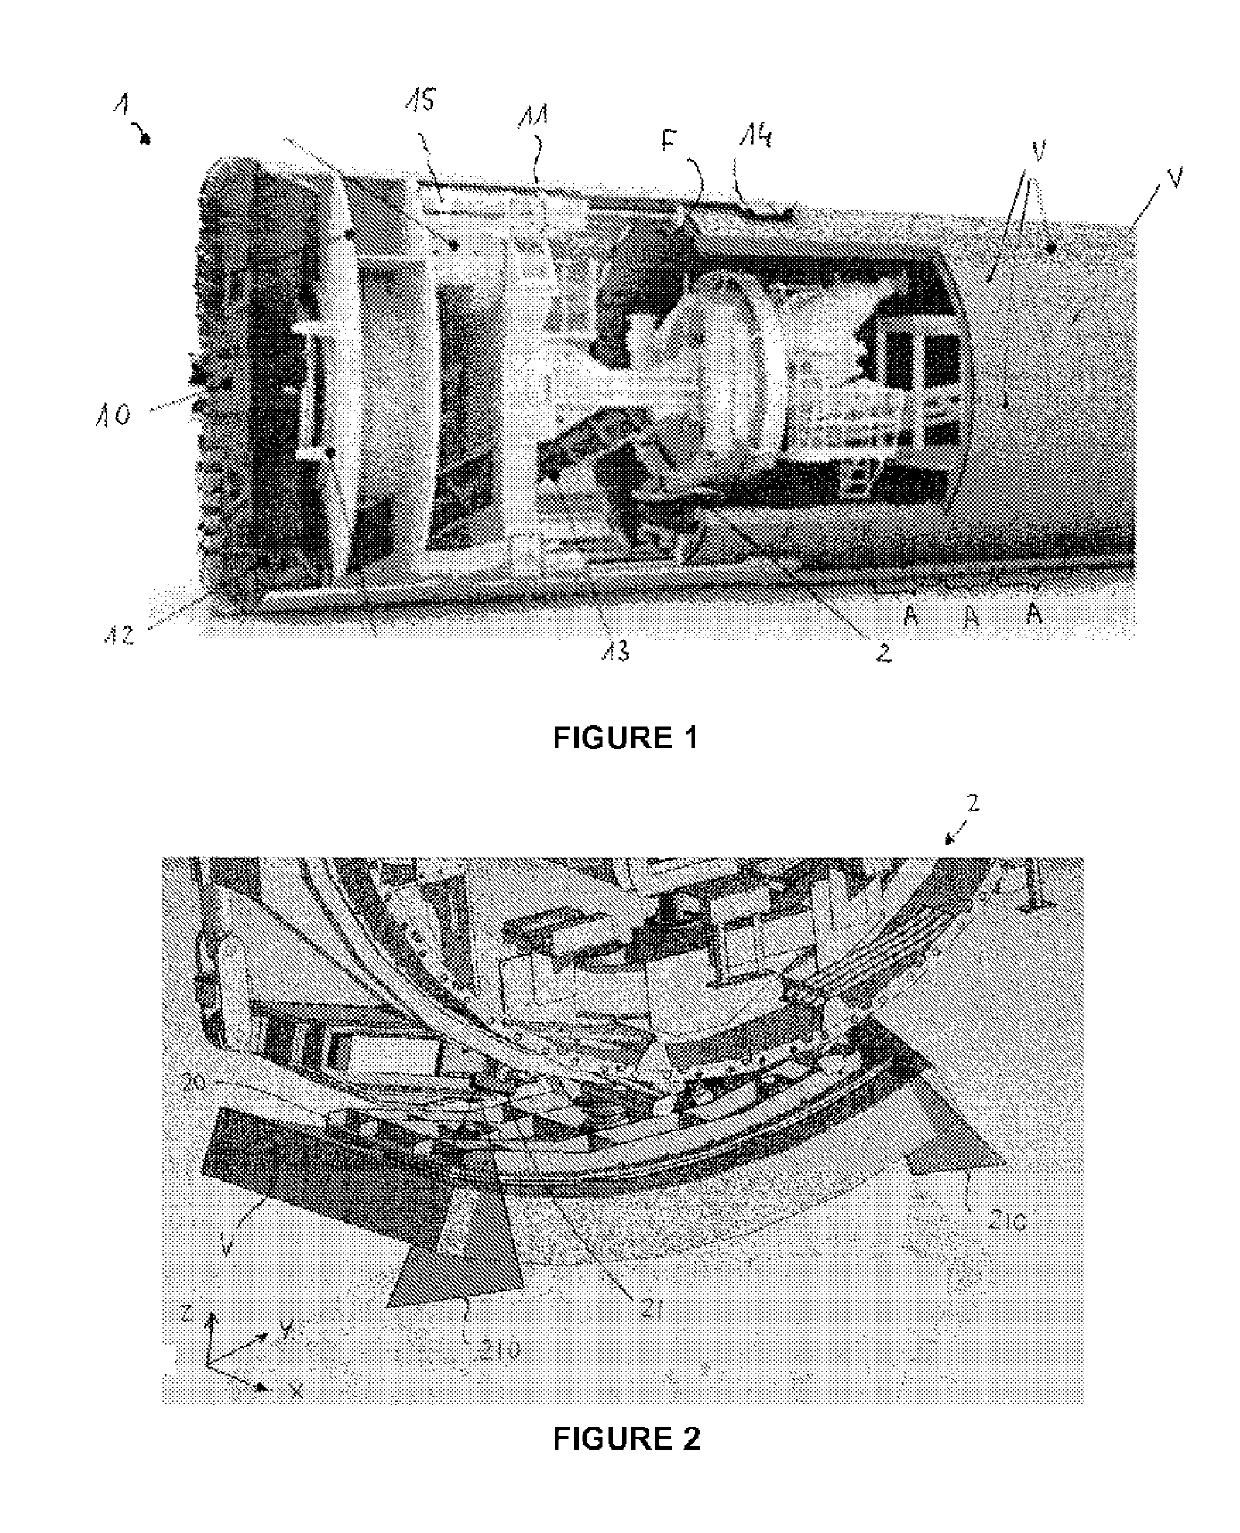 Device and method for the automated picking up and laying of a segment to form a lining of a tunnel